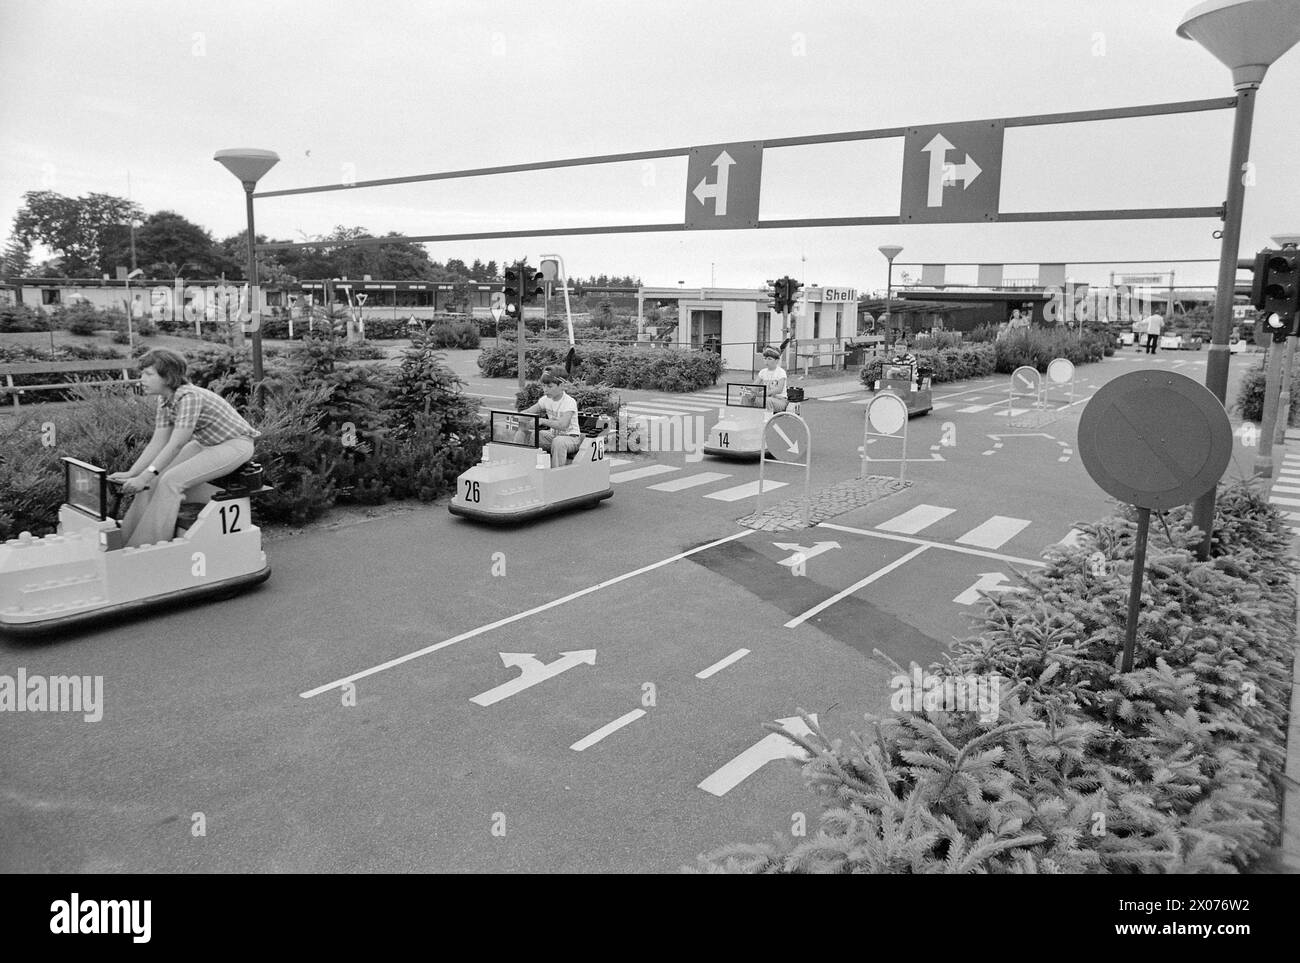 Current 30 - 6 - 1973: Playland for young and oldLegoland is a mini-kingdom that lives only on tourism. Last year, this fantasy world near Billund in Denmark was visited by no less than 777,000 enthusiastic people – young and old. The peak visit in one day is 20,000 people. Legoland is an adventure world for children, but it still attracts more adults. Last year, fully 70 per cent of the visitors were adults.  Legoland has its own traffic school for school-age children. The children drive around a city with regular traffic problems and are told through loudspeakers about mistakes they make.  P Stock Photo